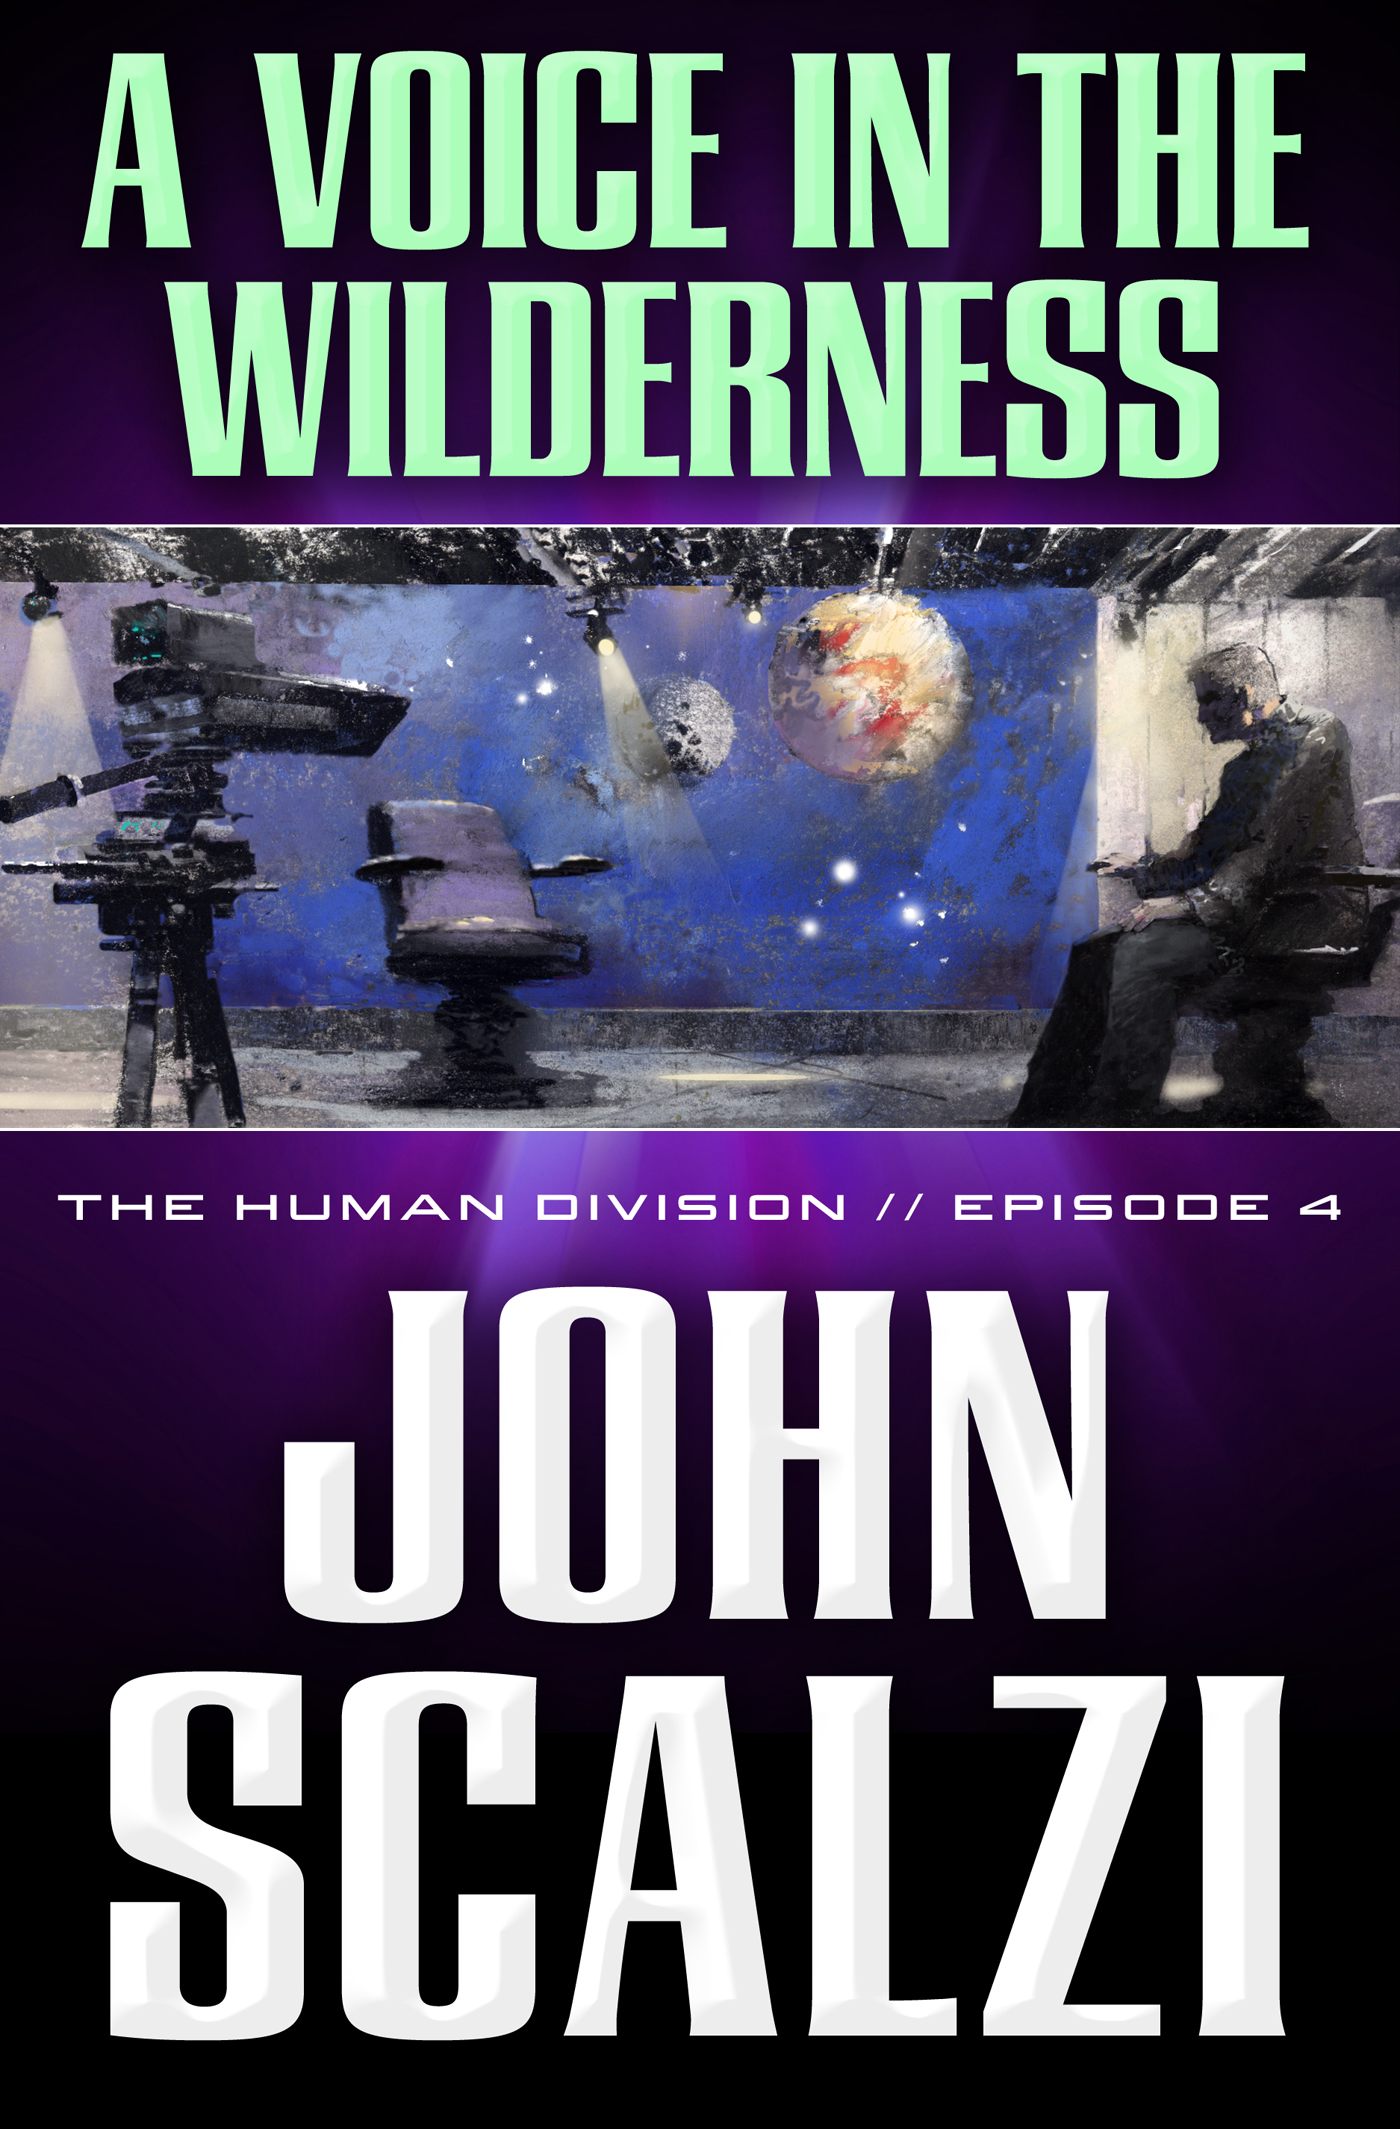 The Human Division #4: A Voice in the Wilderness by John Scalzi